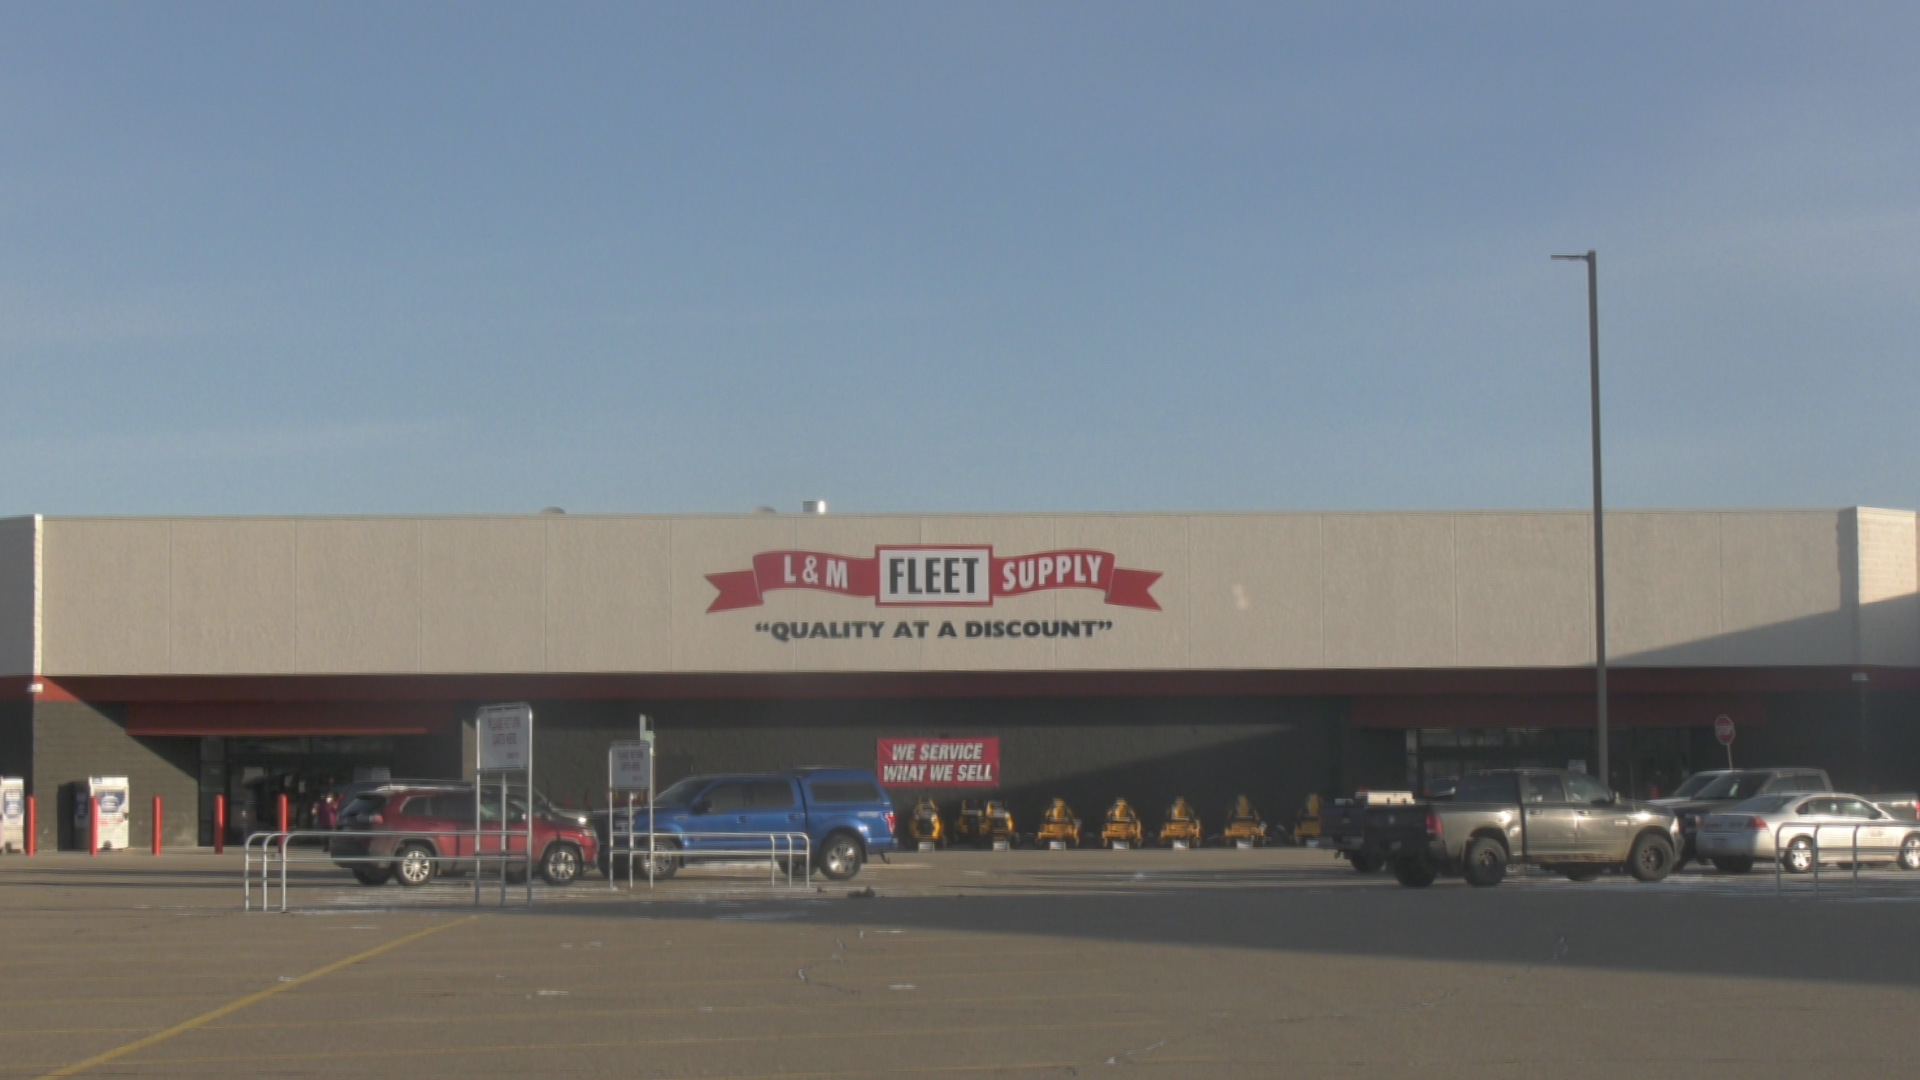 L&M Fleet Supply is located at the former Shopko building